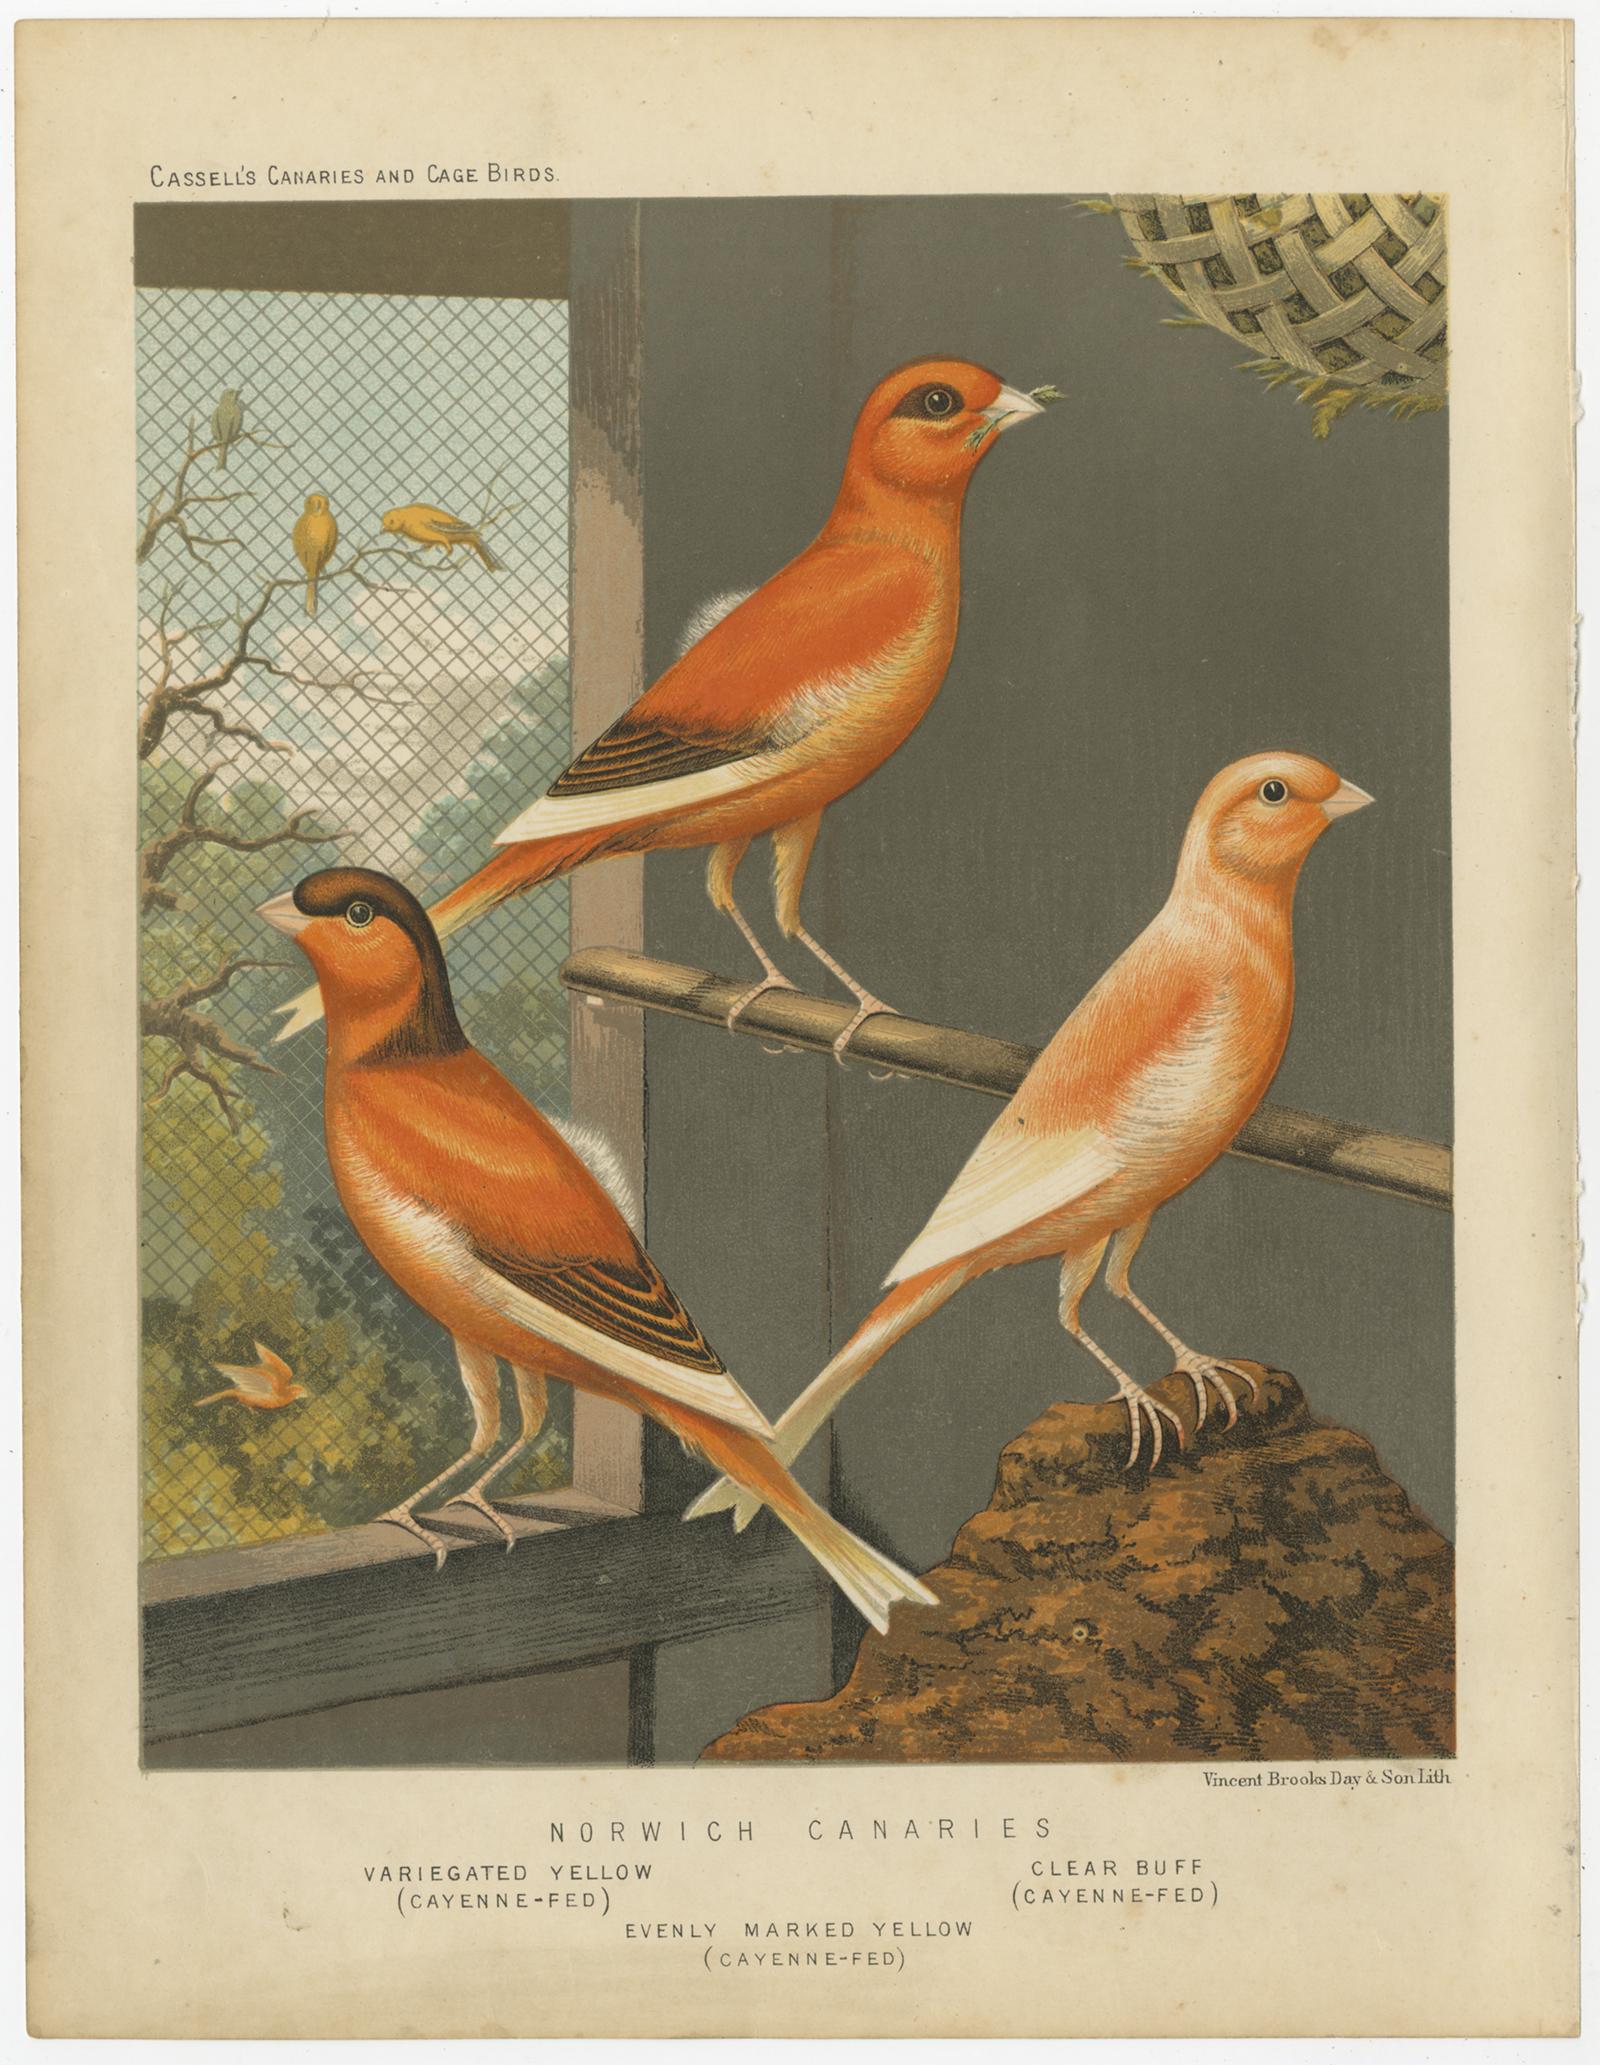 Antique bird print titled 'Norwich Canaries 1. Variegated Yellow (Cayenne-Fed) 2. Evenly Marked Yellow (Cayenne-Fed) 3. Clear Buff (Cayenne-Fed)' Old bird print depicting the Norwich Canaries: Variegated Yellow, Evenly Marked Yellow, Clear Buff.